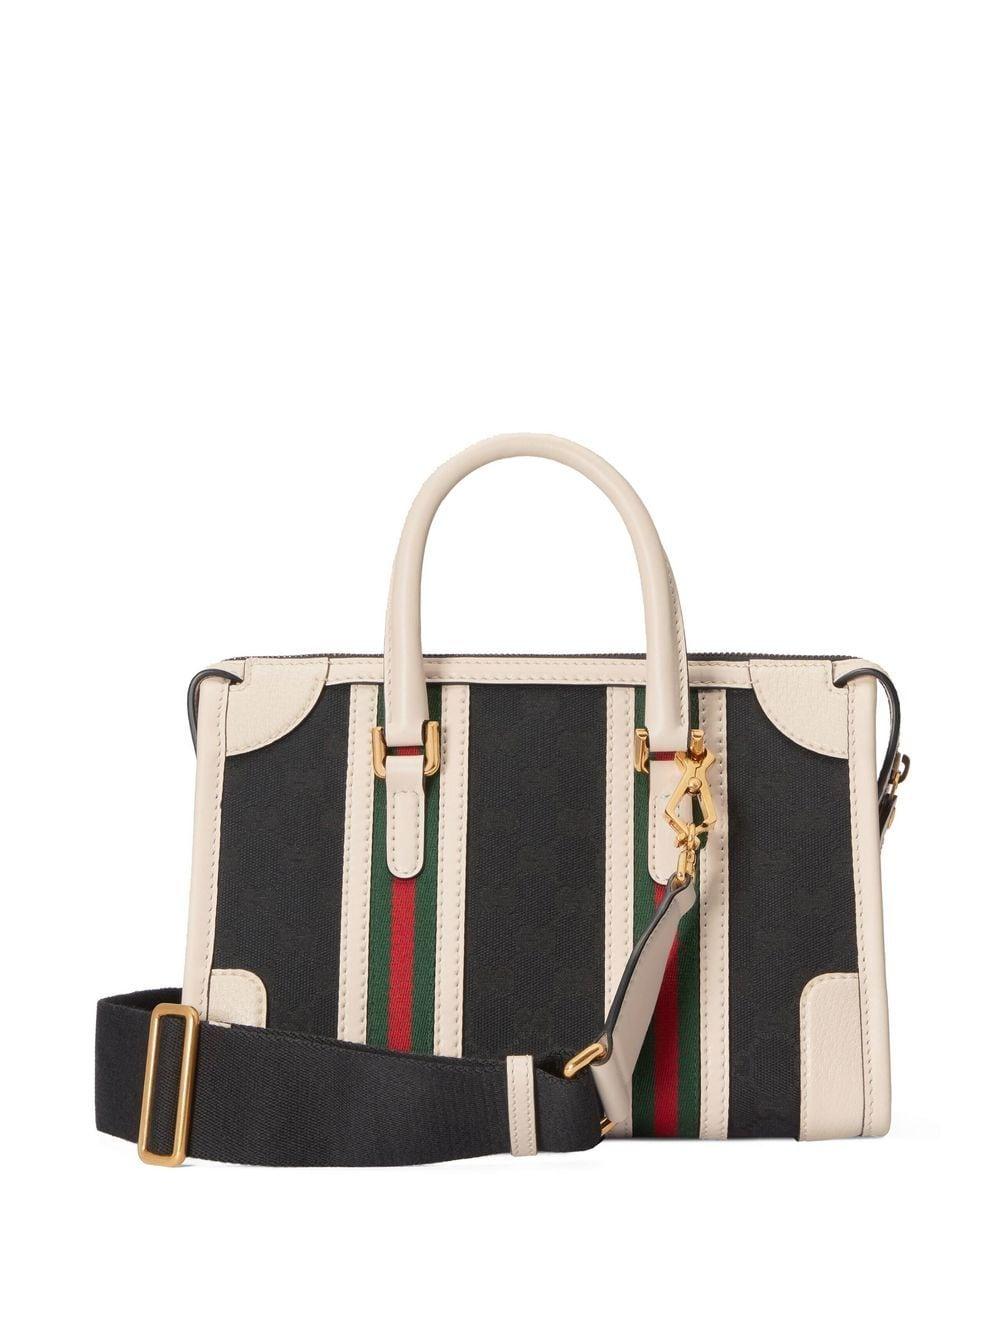 Gucci Ophidia Small Top Hadle Bag in White | Lyst